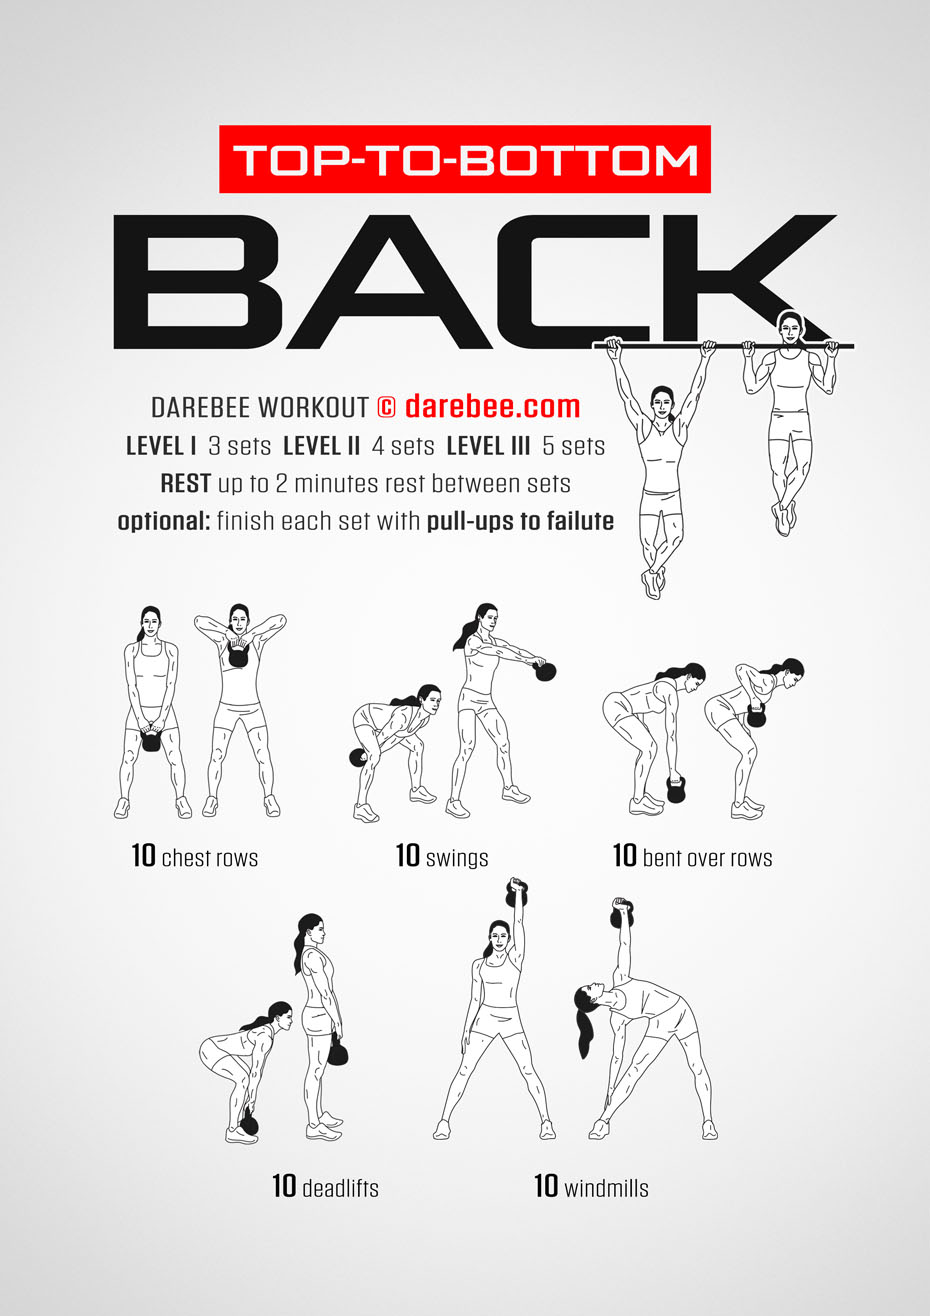 Top-to-Bottom Back Workout